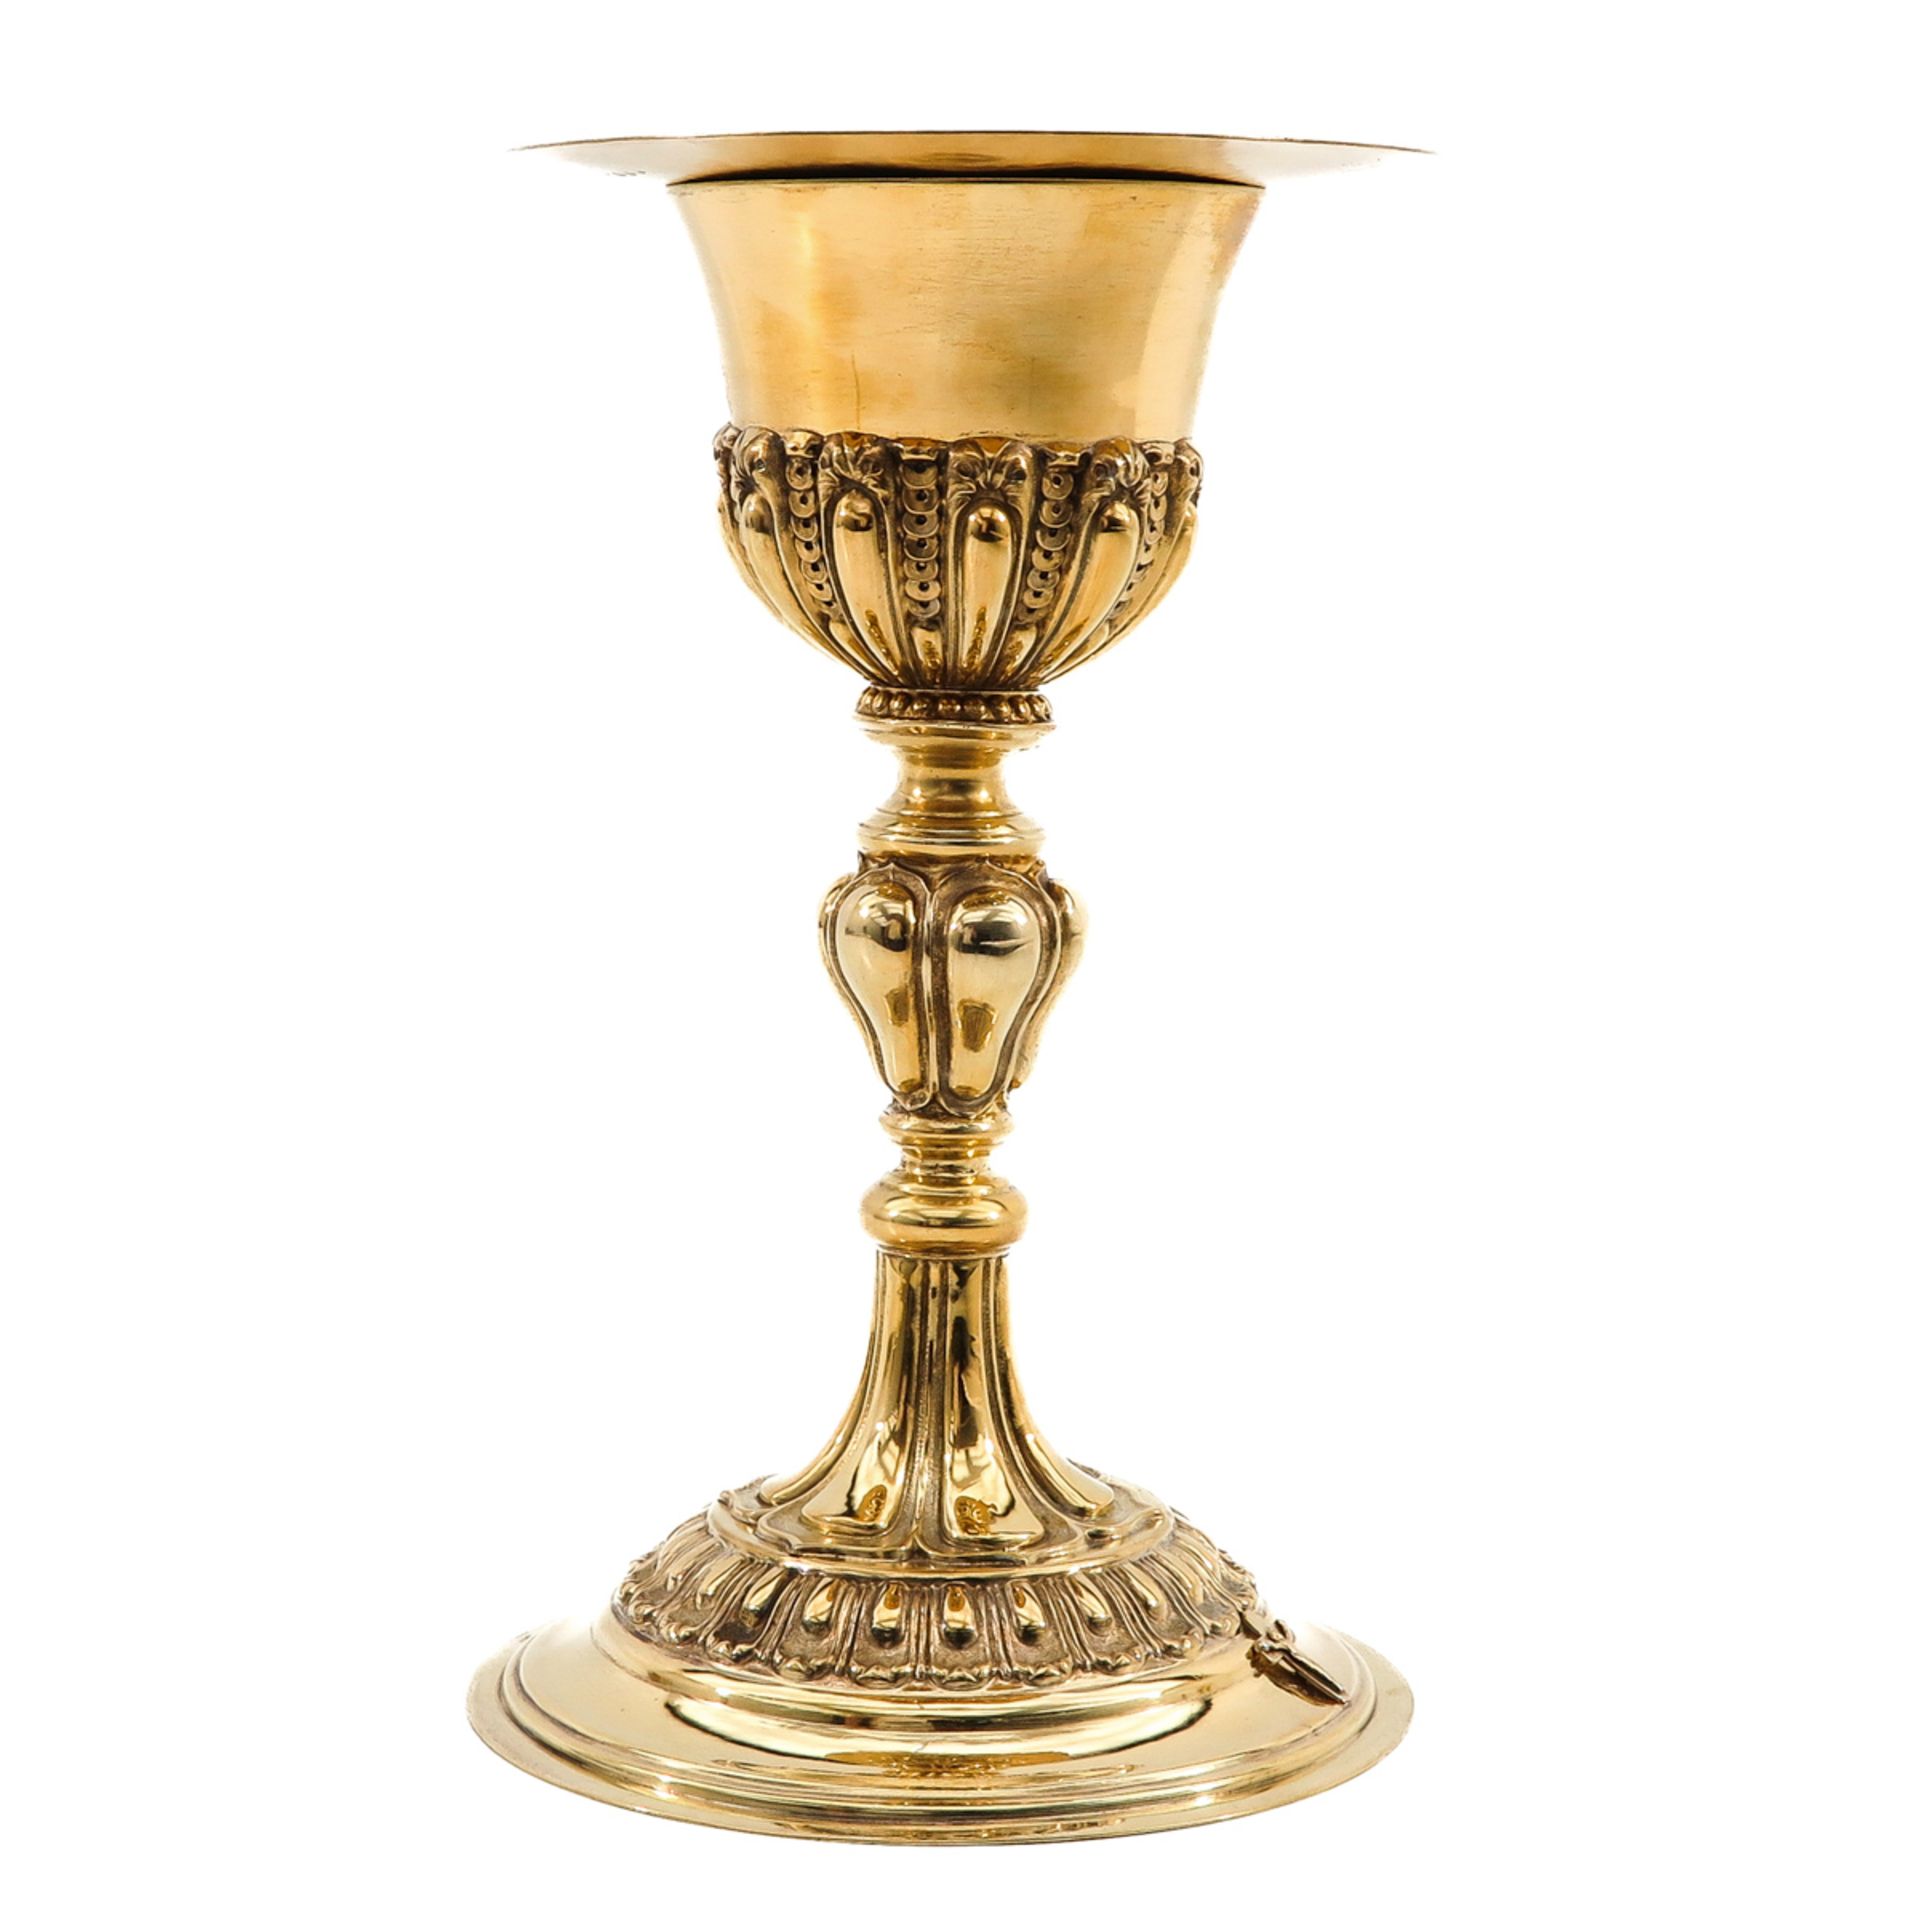 A Gold Plated Silver Chalice with Paten and Spoon - Image 3 of 10